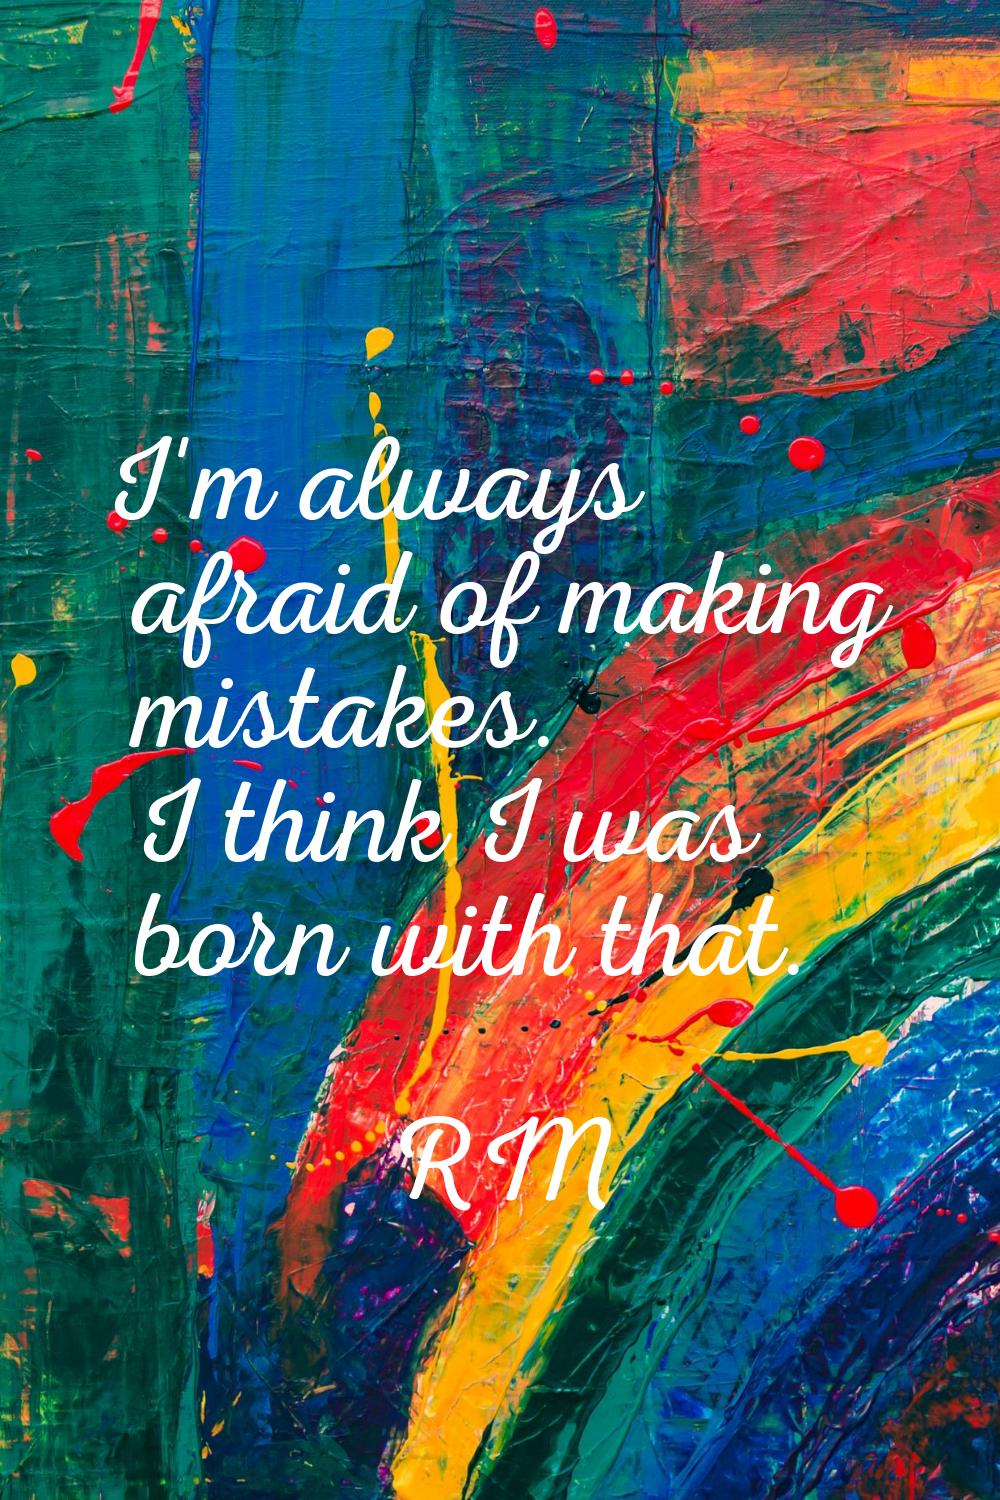 I'm always afraid of making mistakes. I think I was born with that.